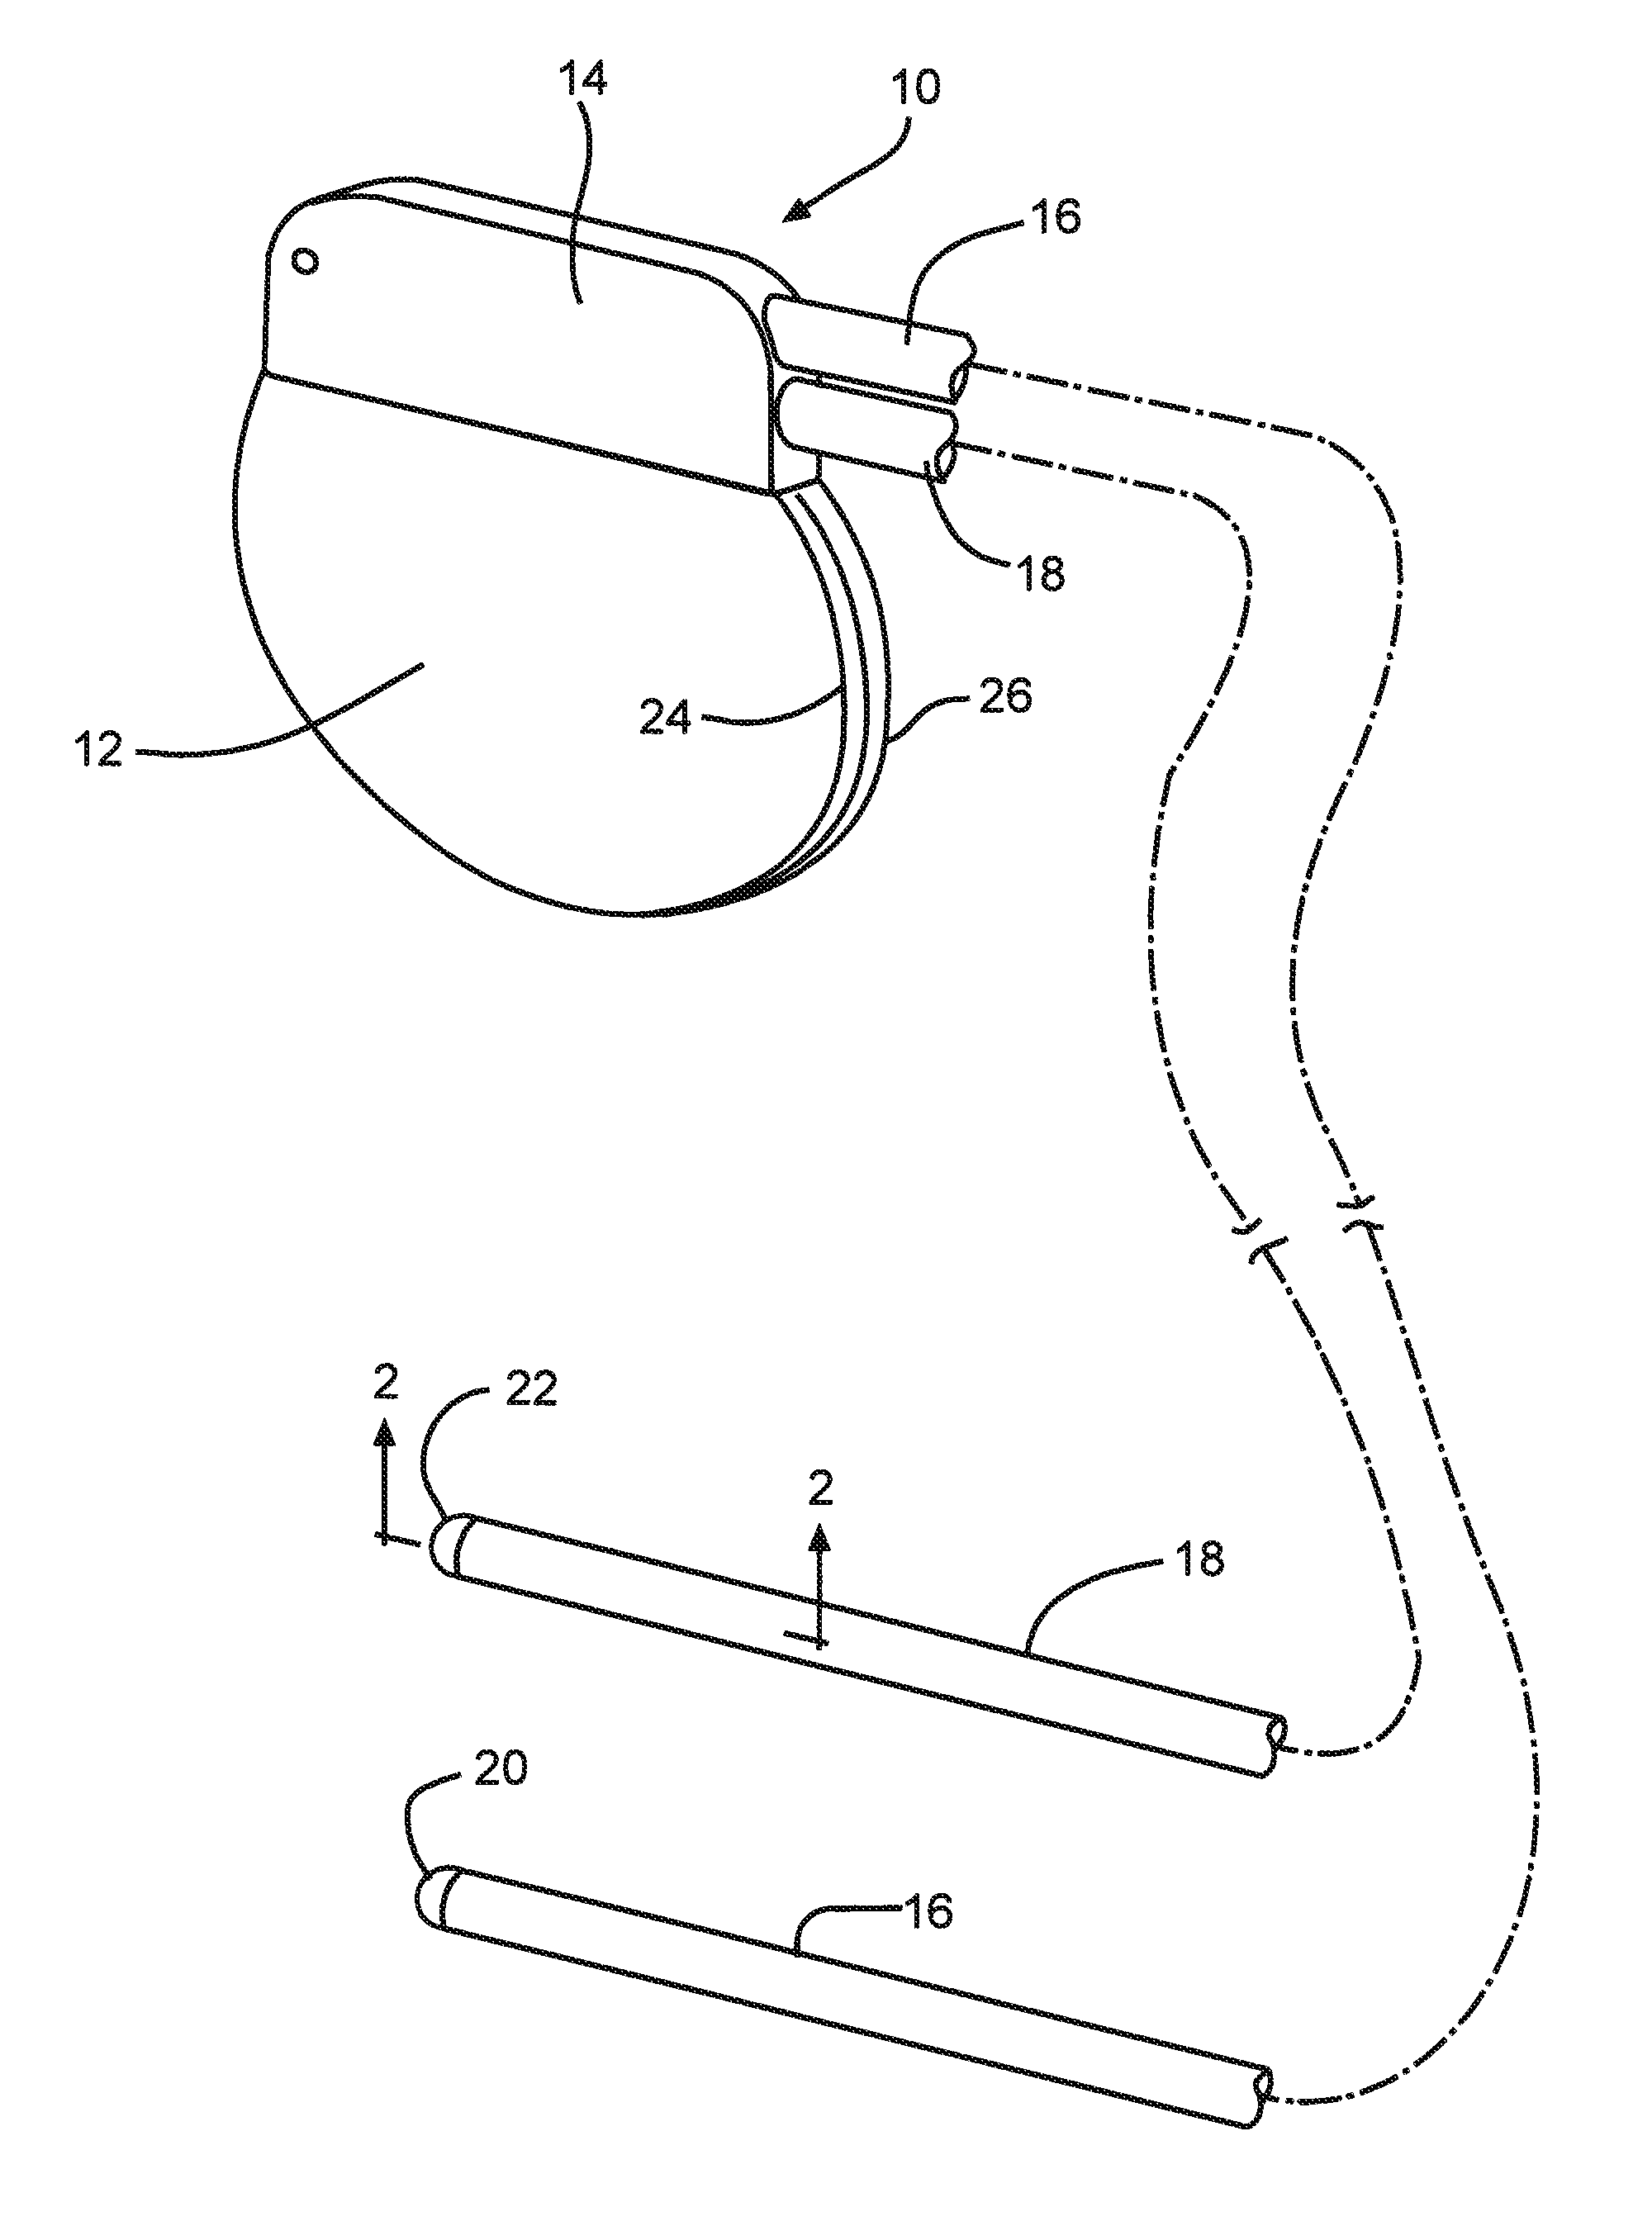 Method For Providing An Implantable Electrical Lead Wire